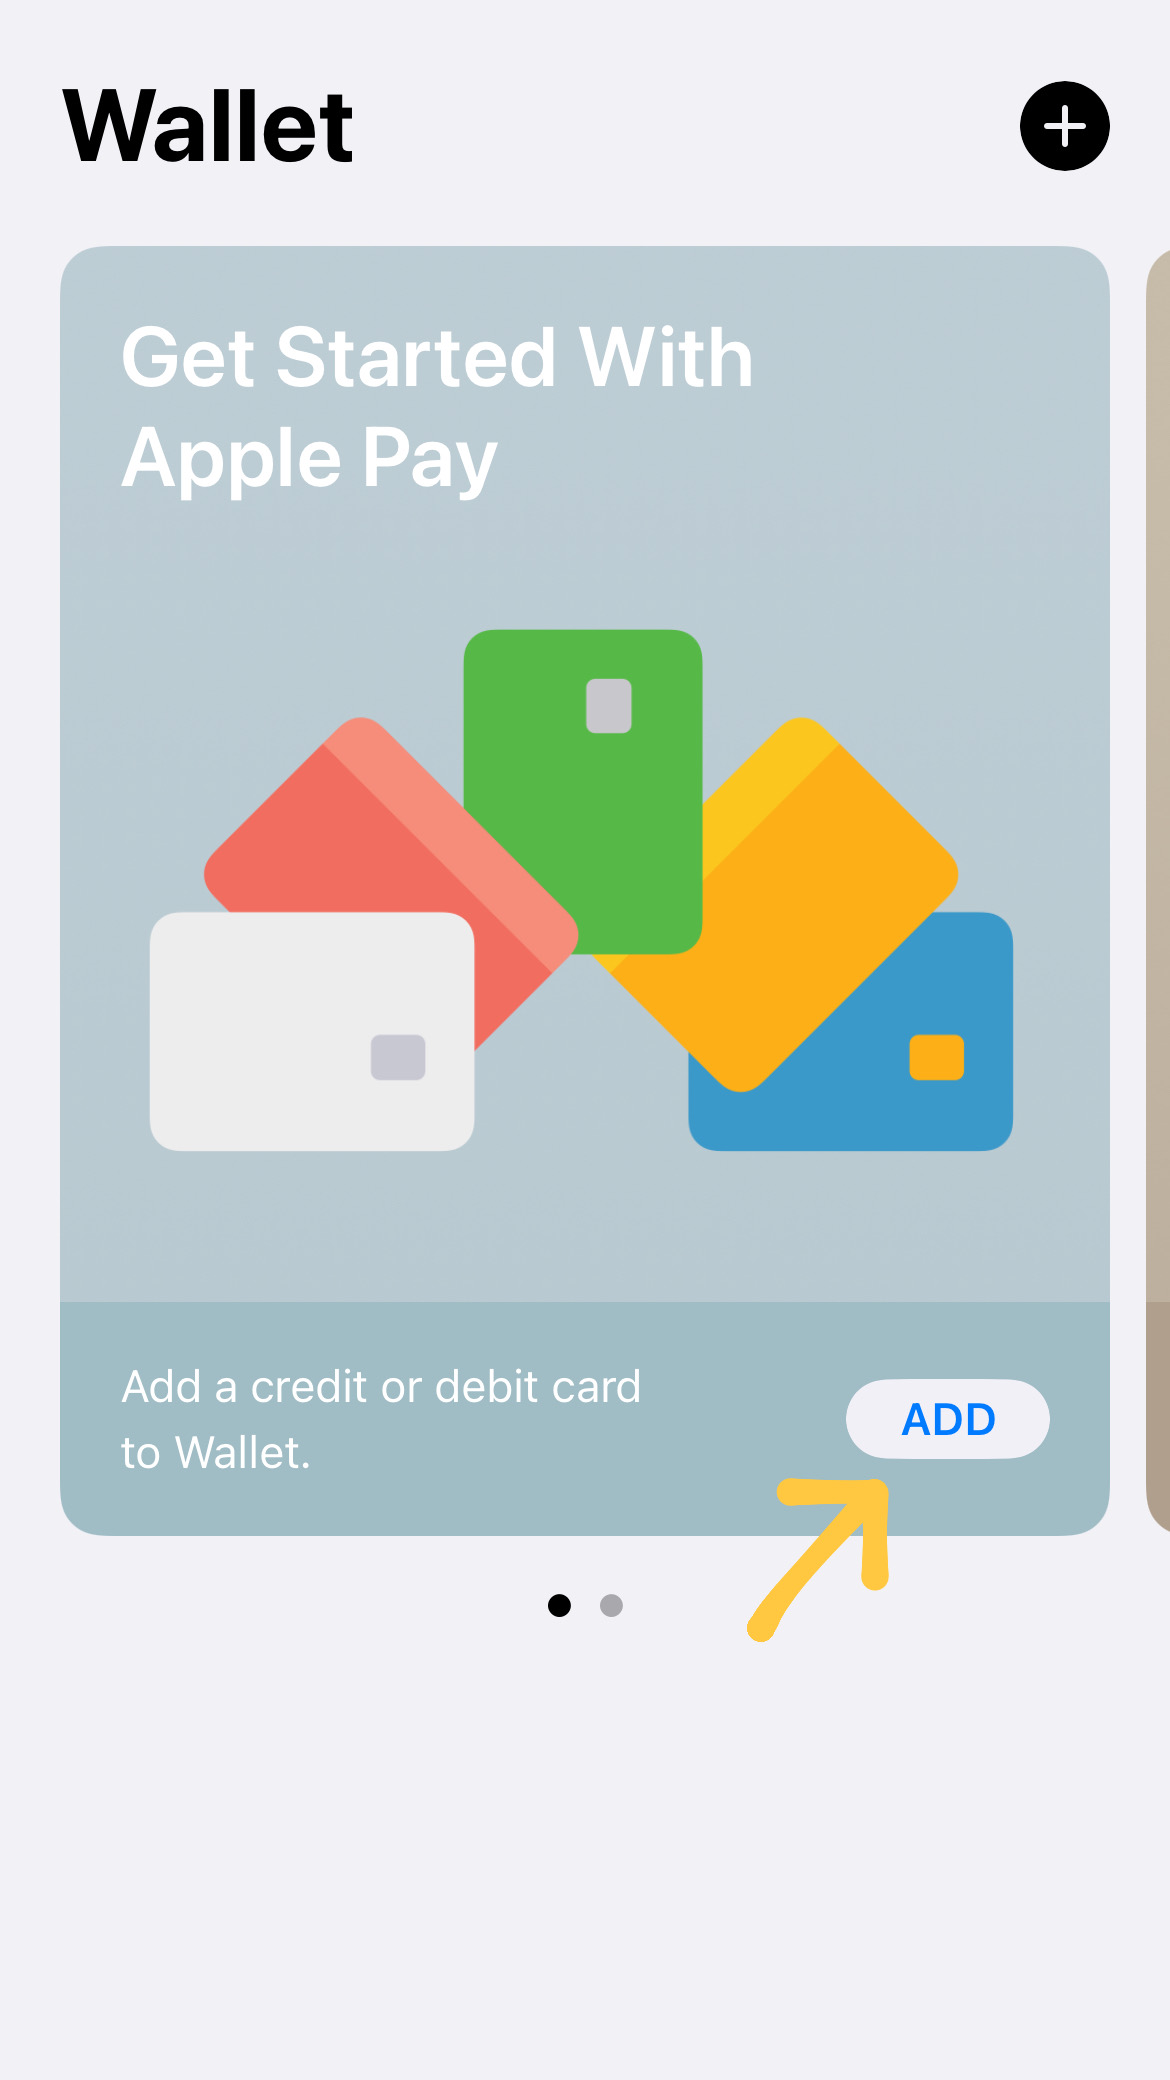 Apple Pay Malaysia is finally available! Here's how you can set it up in a few easy steps. Image credit: Wau Post